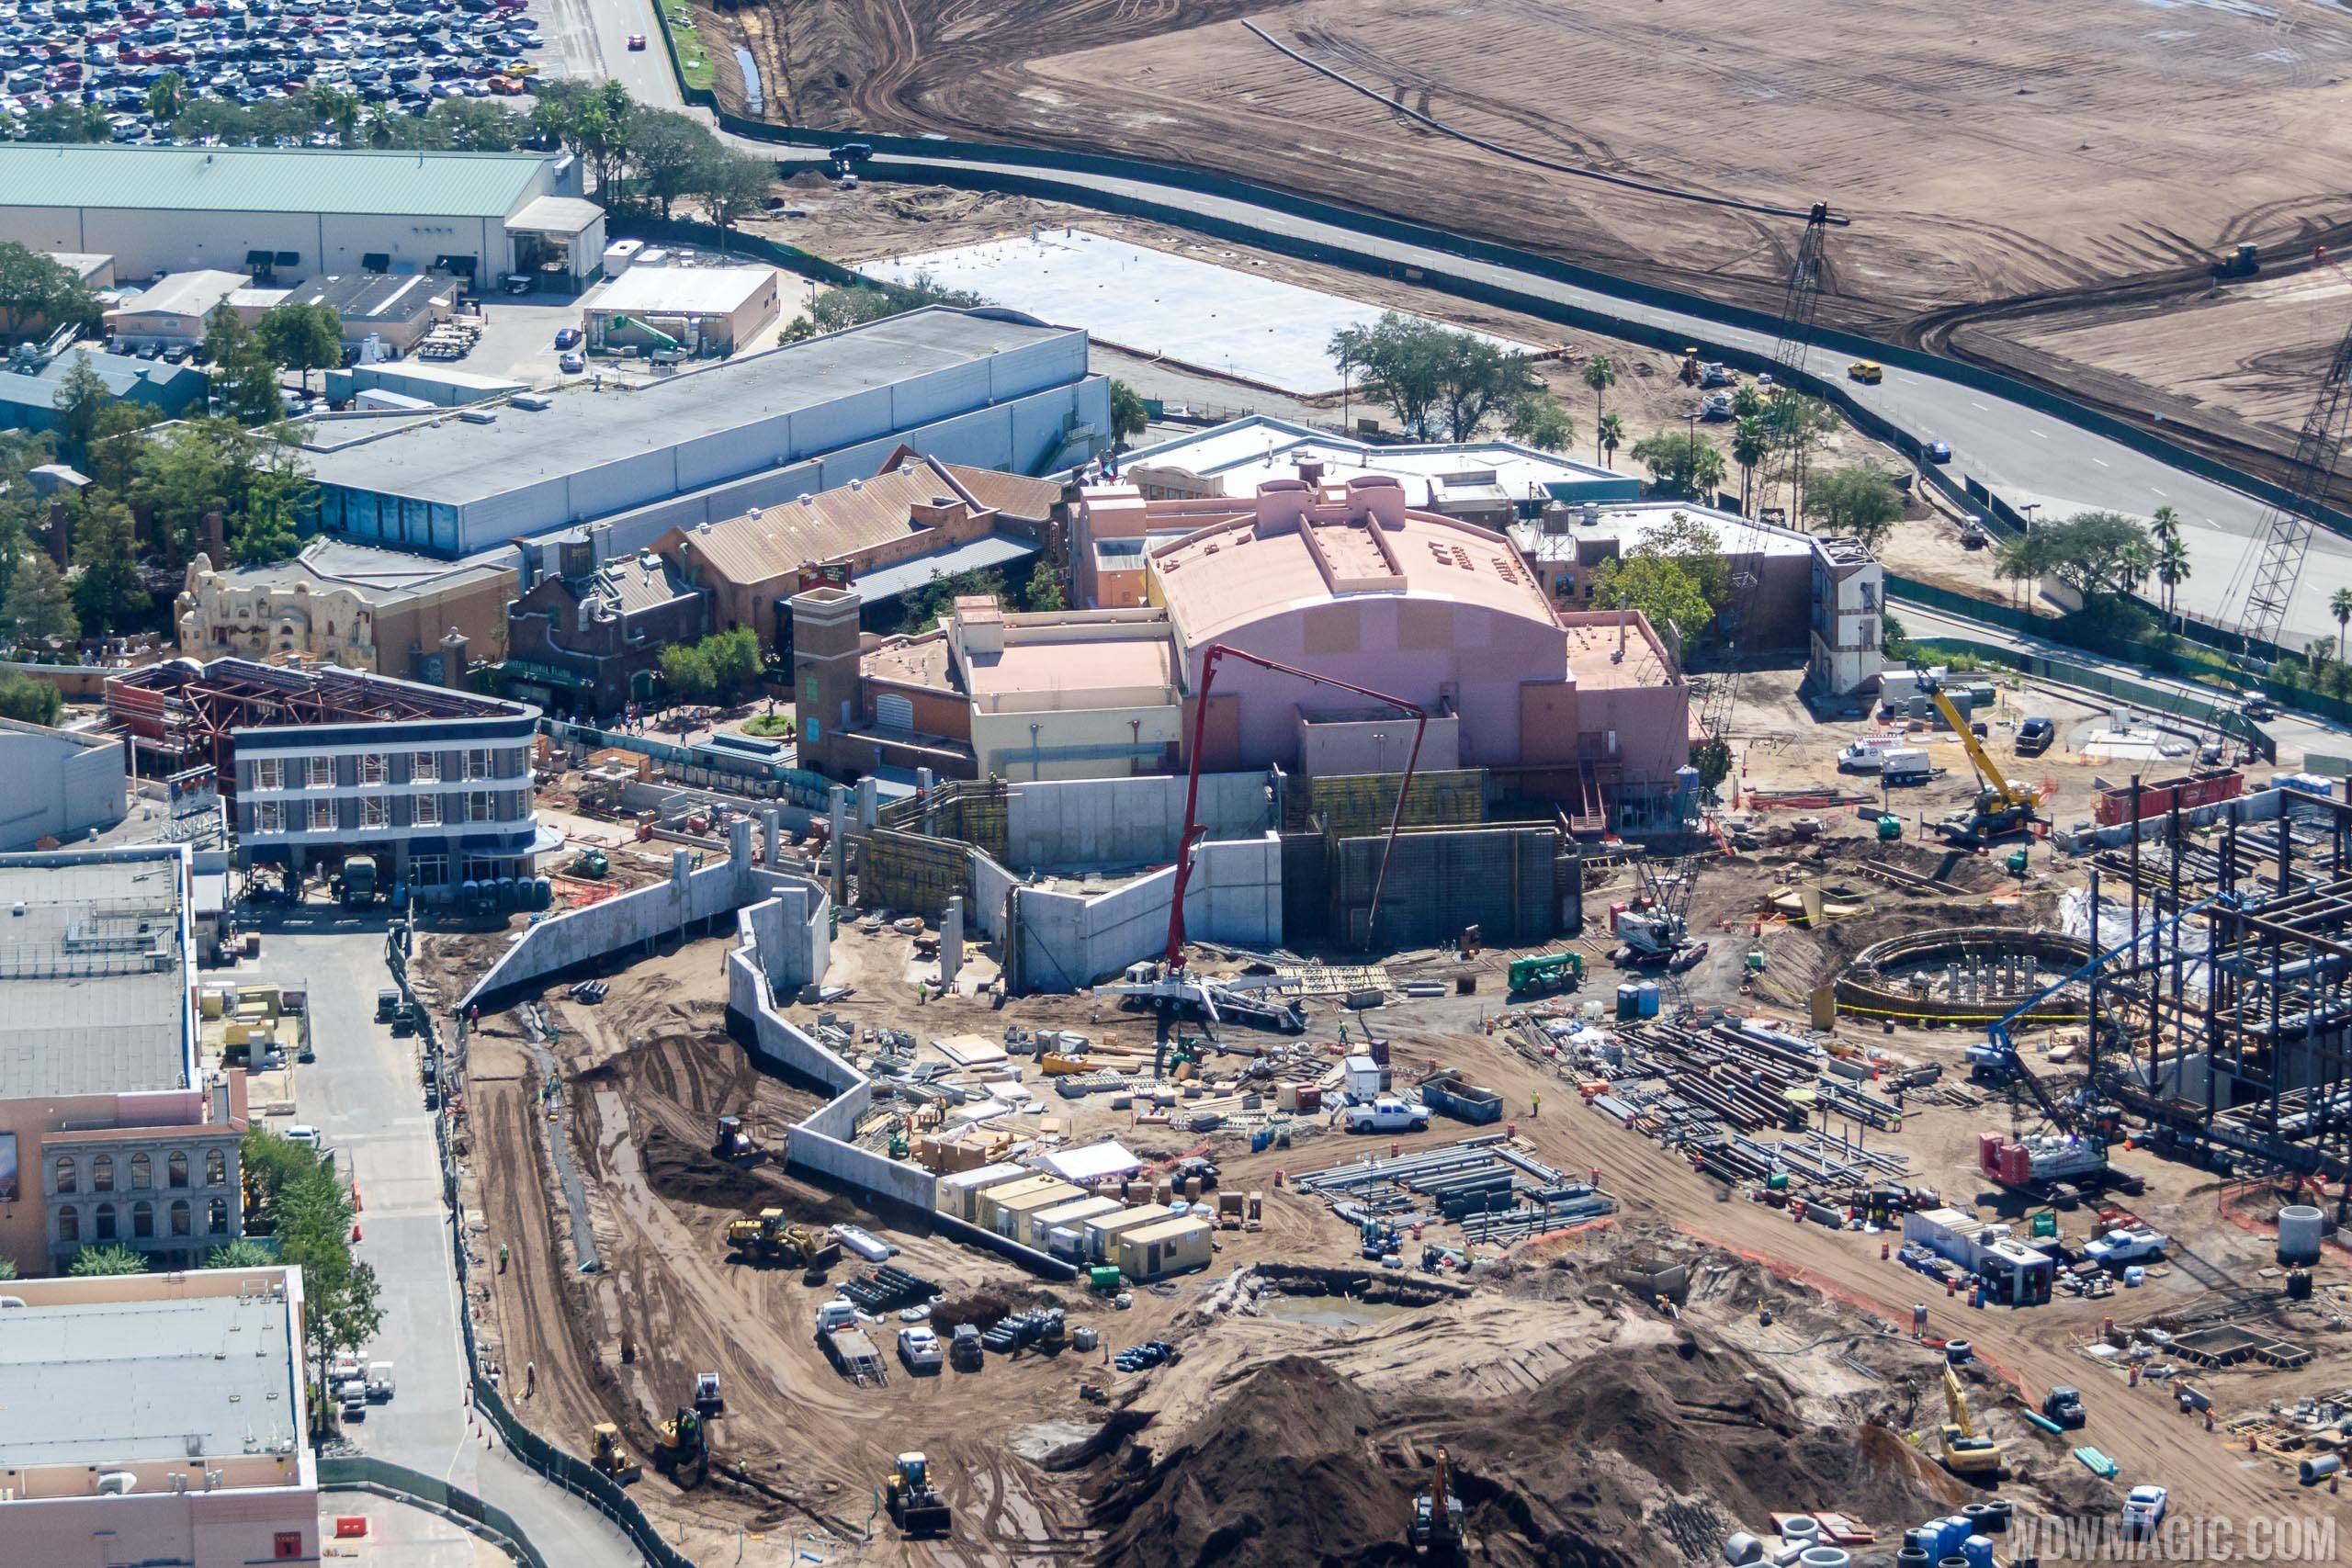 Star Wars Galaxy's Edge aerial view - Area between Star Wars and Grand Avenue